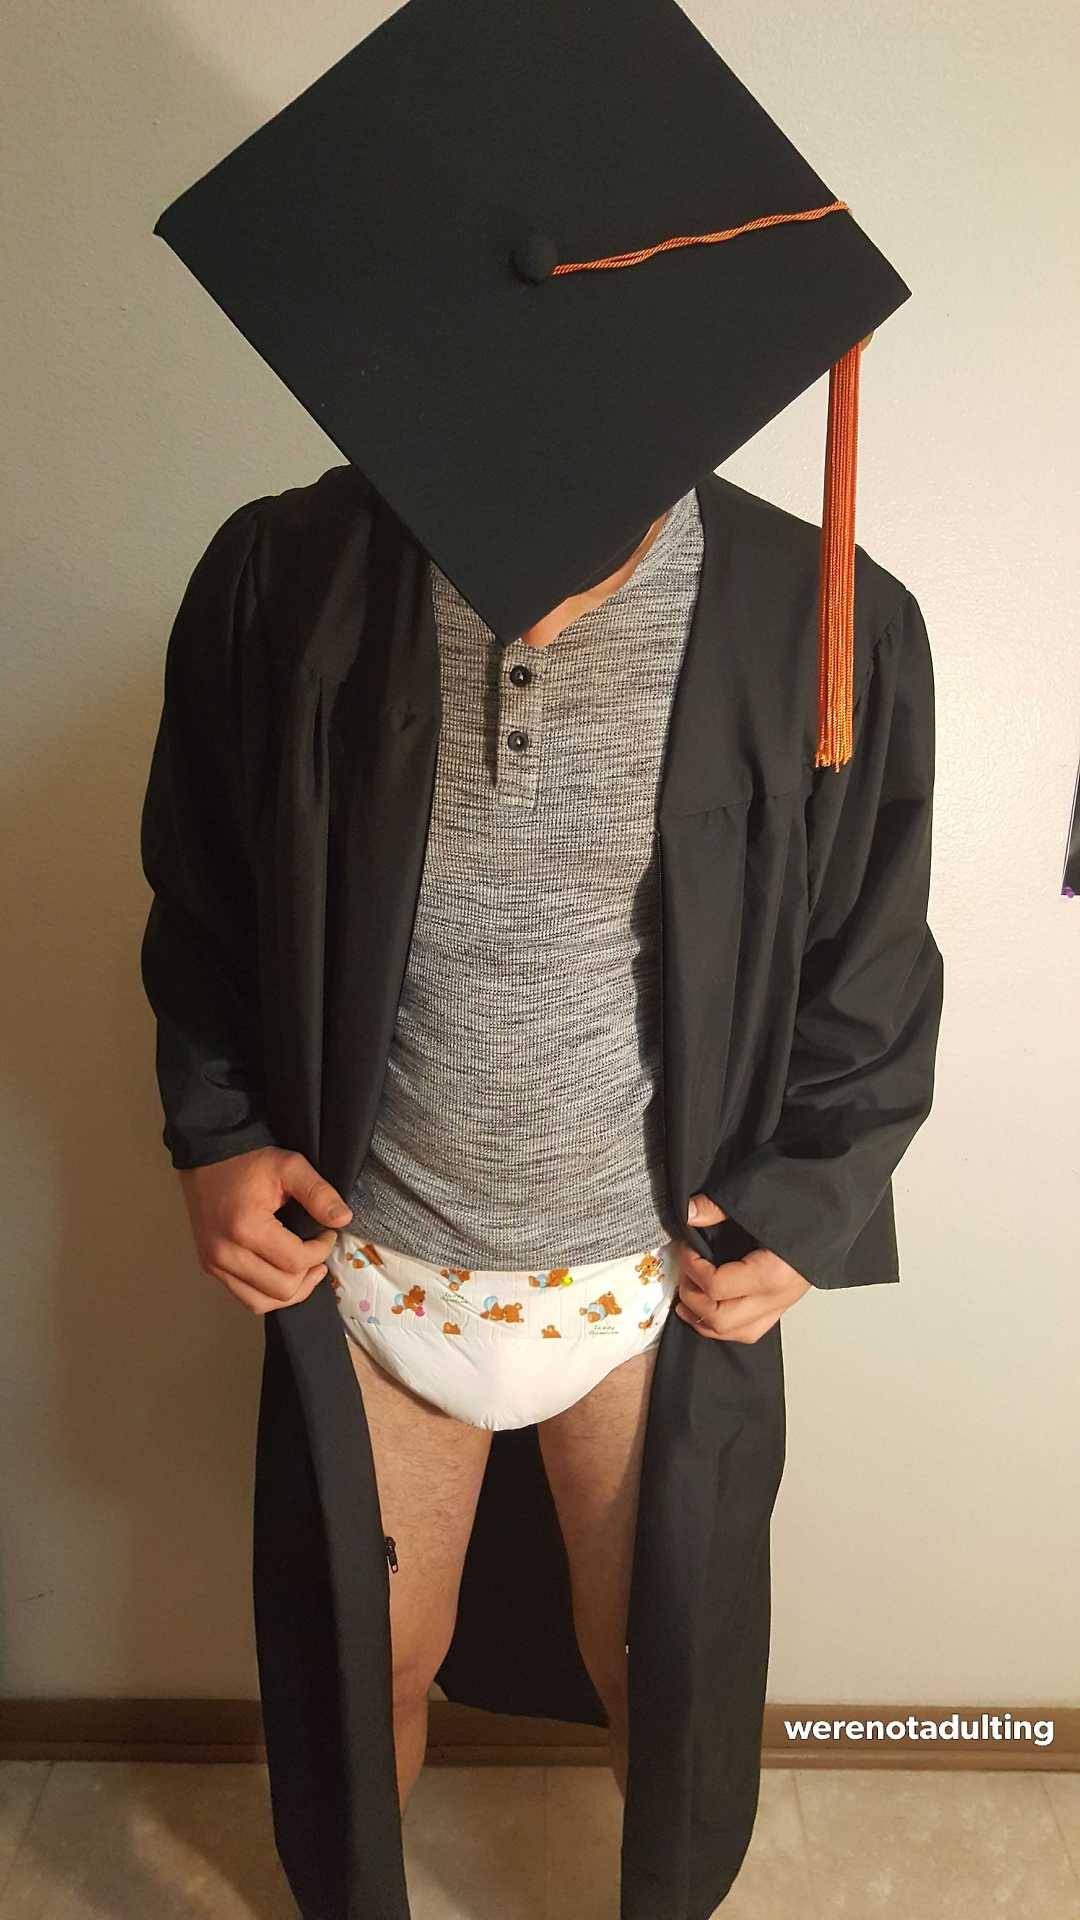 werenotadulting:  Finished with college, not finished with potty training  In disbelief